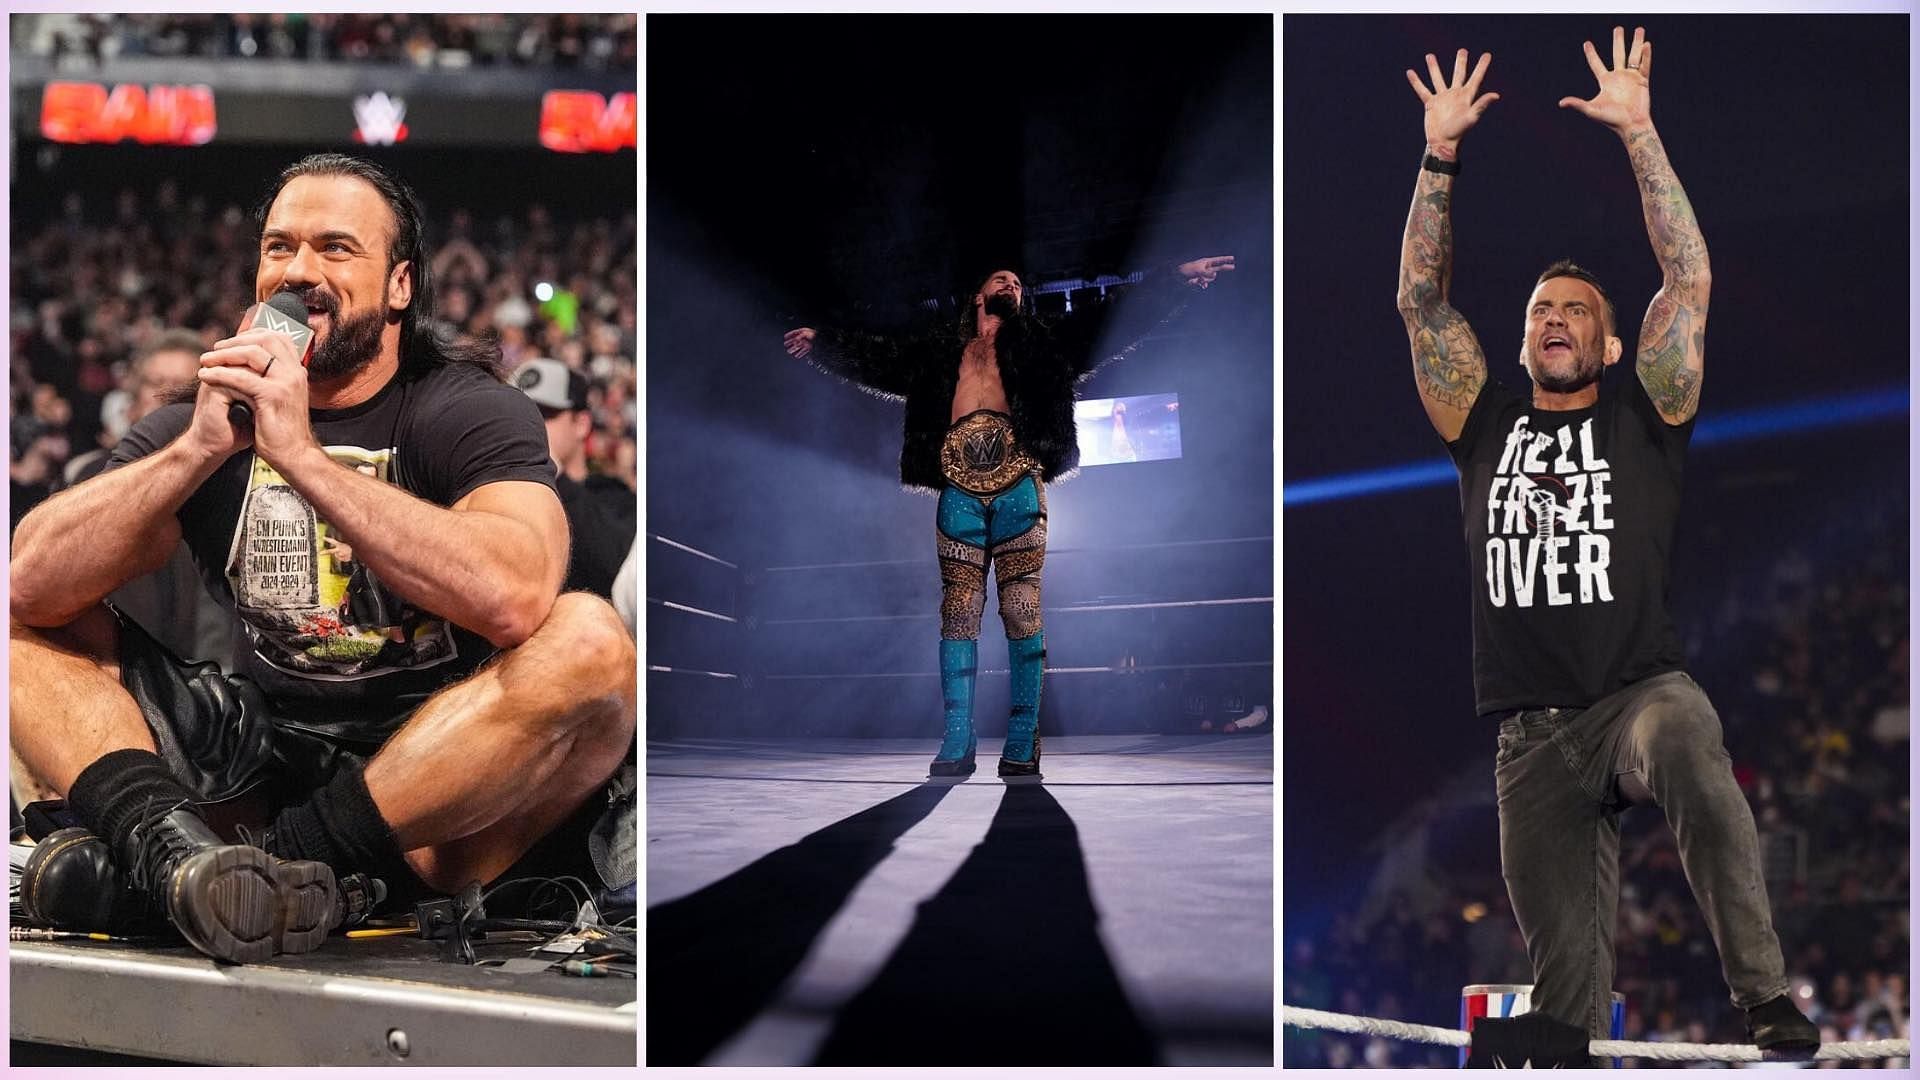 Drew McIntyre, Seth Rollins, and CM Punk in picture